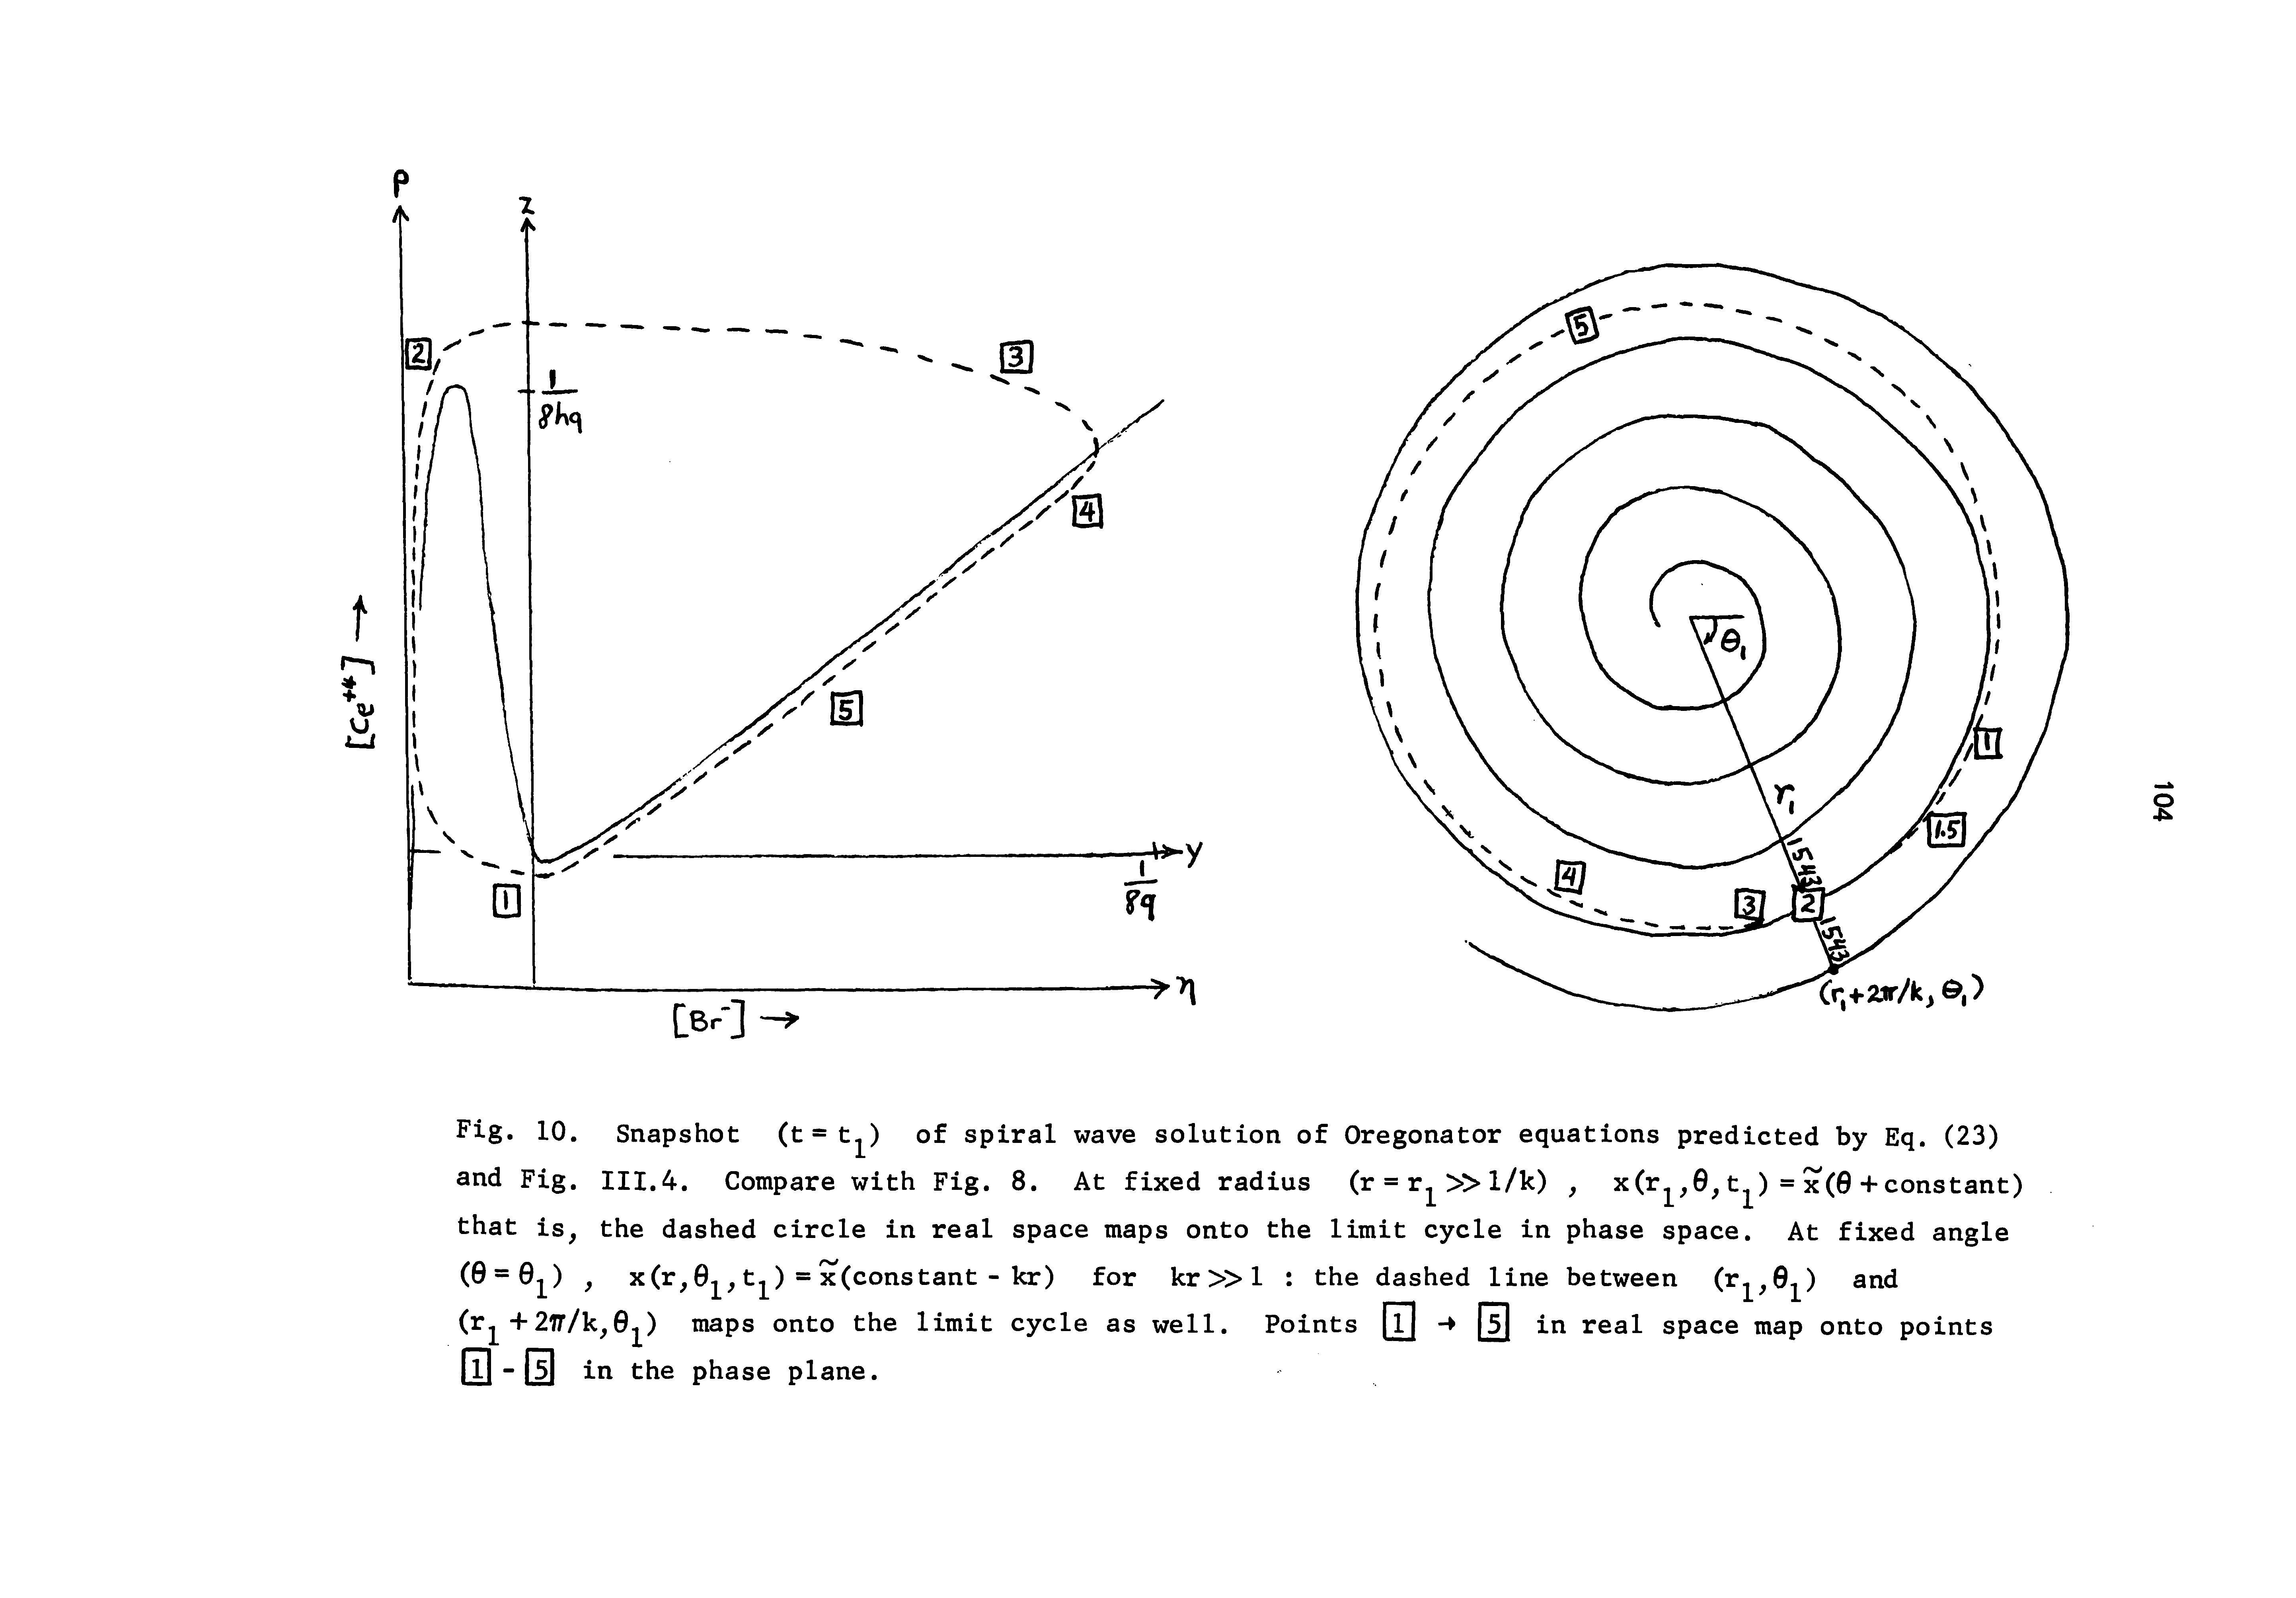 Fig. 10. Snapshot (t = tof spiral wave solution of Oregonator equations predicted by Eq. (23) and Fig. III.4. Compare with Fig. 8. At fixed radius (r = rj l/k), x(rj, 6,t ) = x(0+constant) that is, the dashed circle in real space maps onto the limit cycle in phase space. At fixed angle (0 = 0 ), x(r, 0, t ) = x(constant - kr) for kr l the dashed line between (rj, 0 ) and (r + 277/k,0j ) maps onto the limit cycle as well. Points 0 m in real space map onto points -H) in the phase plane.